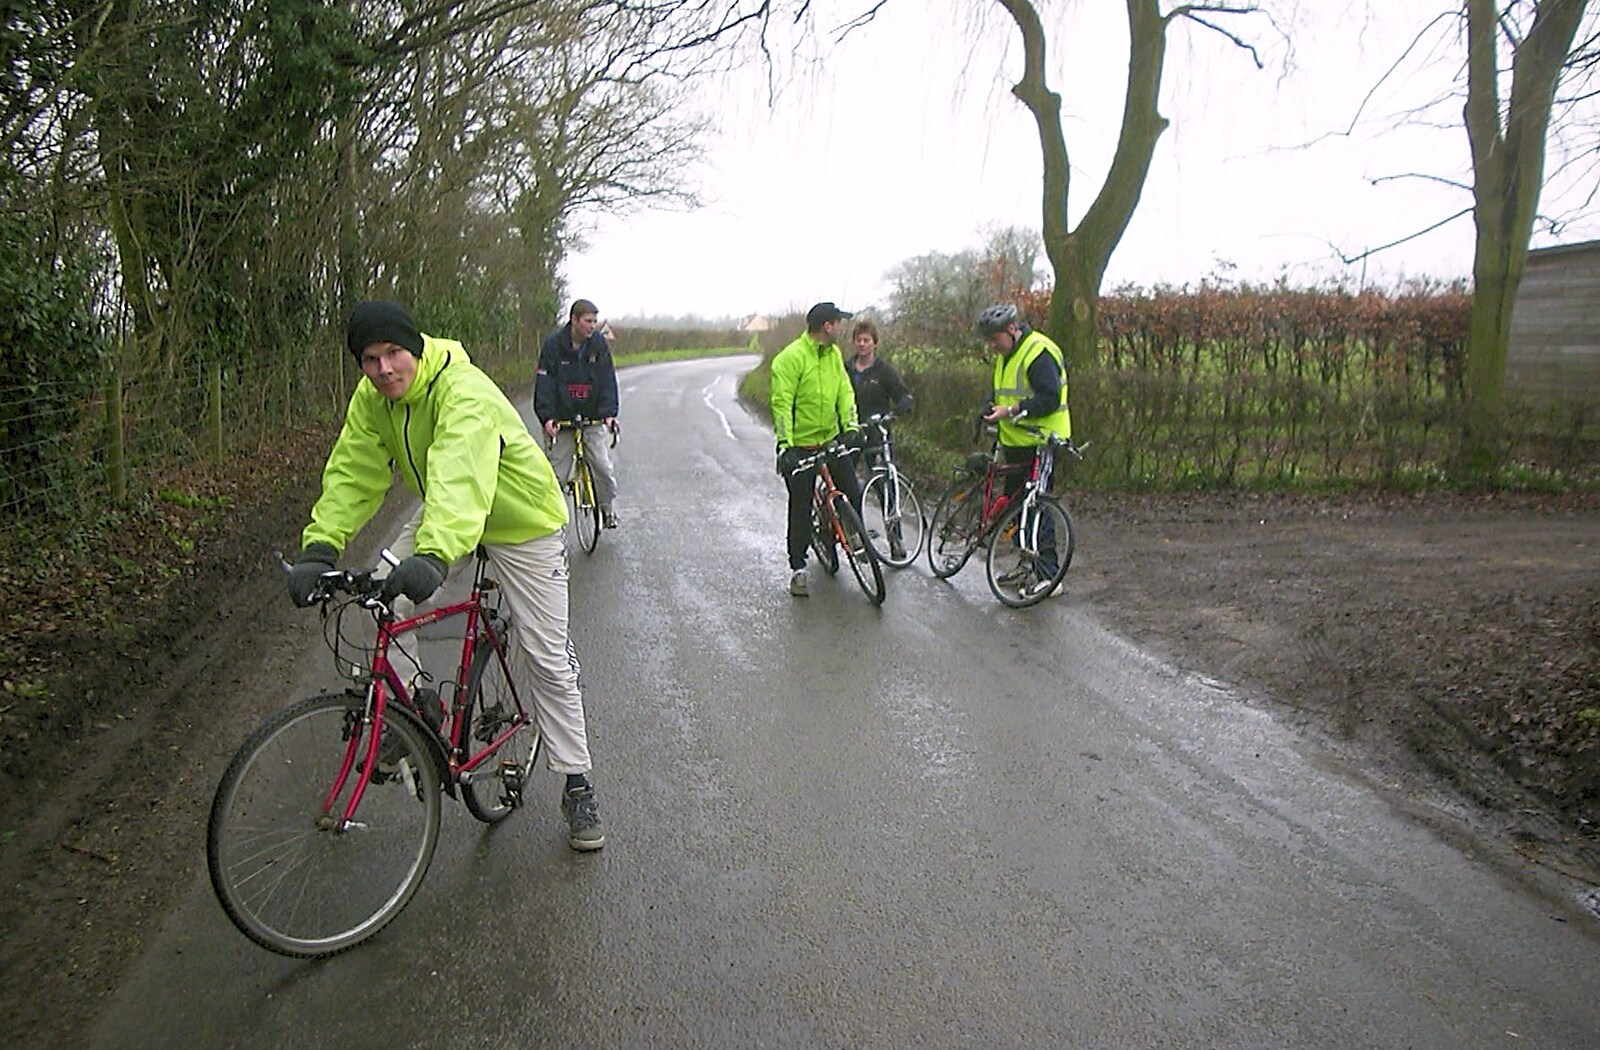 The BSCC's Evil Valentine's Day Bike Ride, Harleston, Norfolk - 14th February 2004: Alan's chain falls off on the way to Brockdish